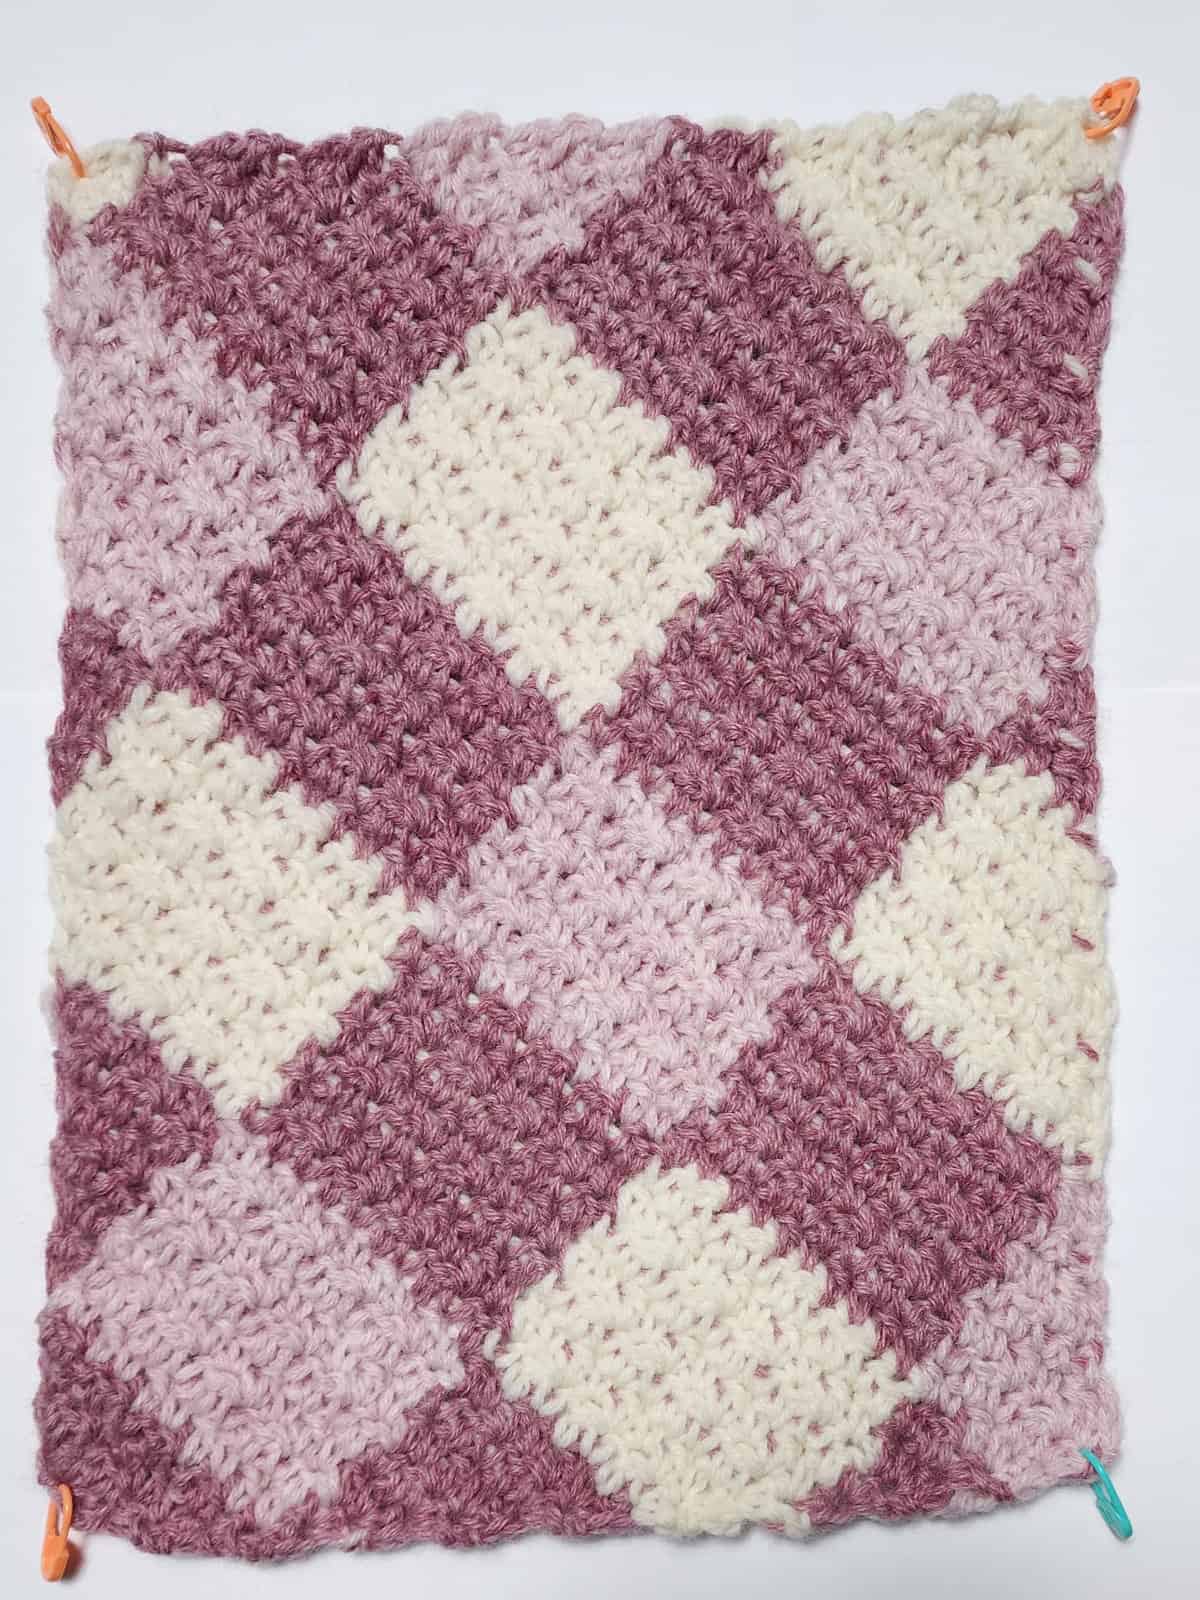 corner to corner plaid blanket swatch complete and ready for border